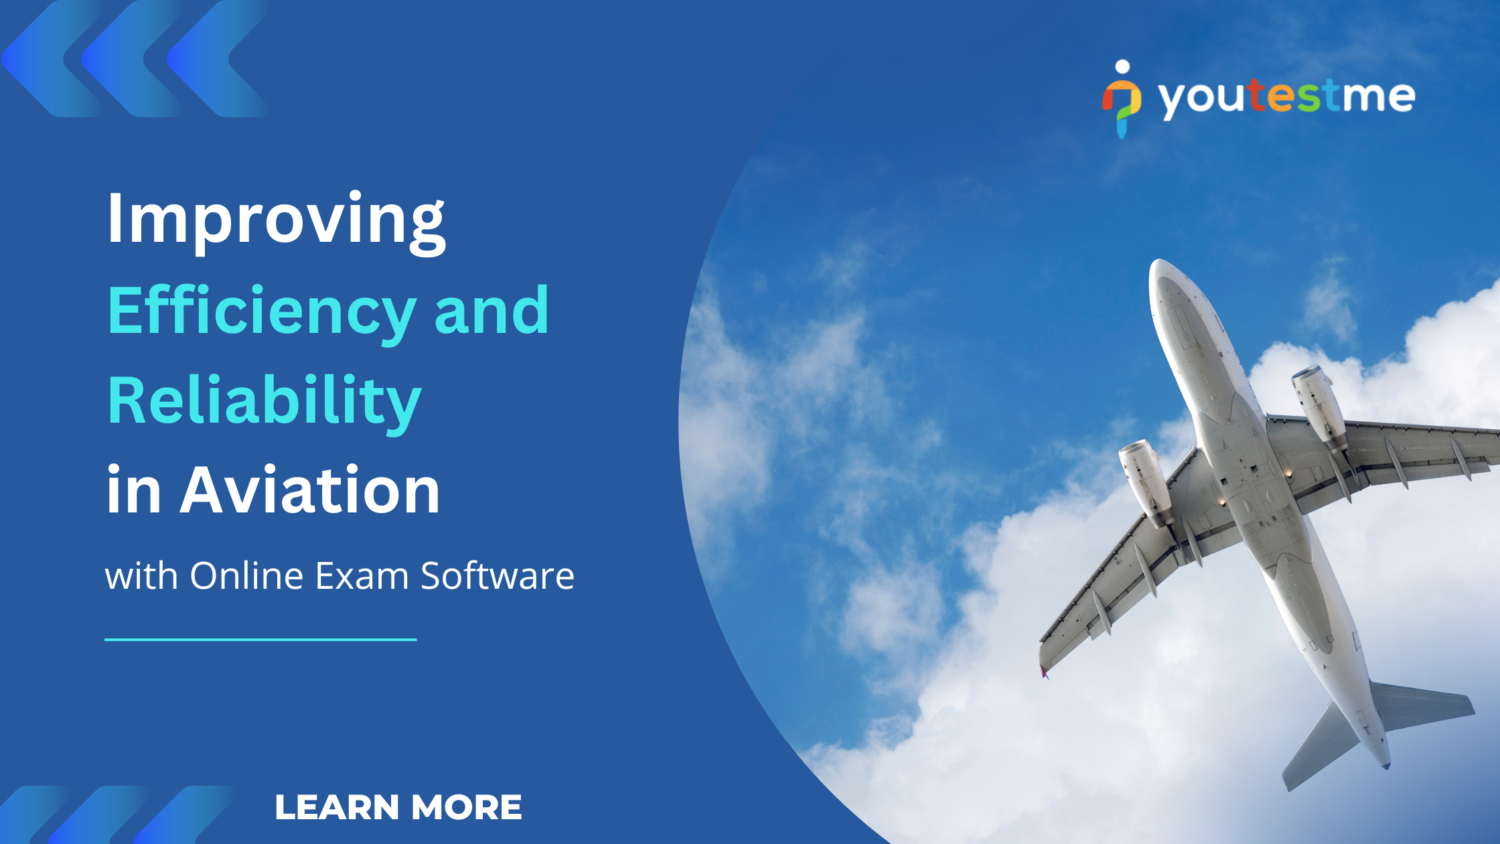 Improving Efficiency and Reliability in Aviation with Online Exam Software